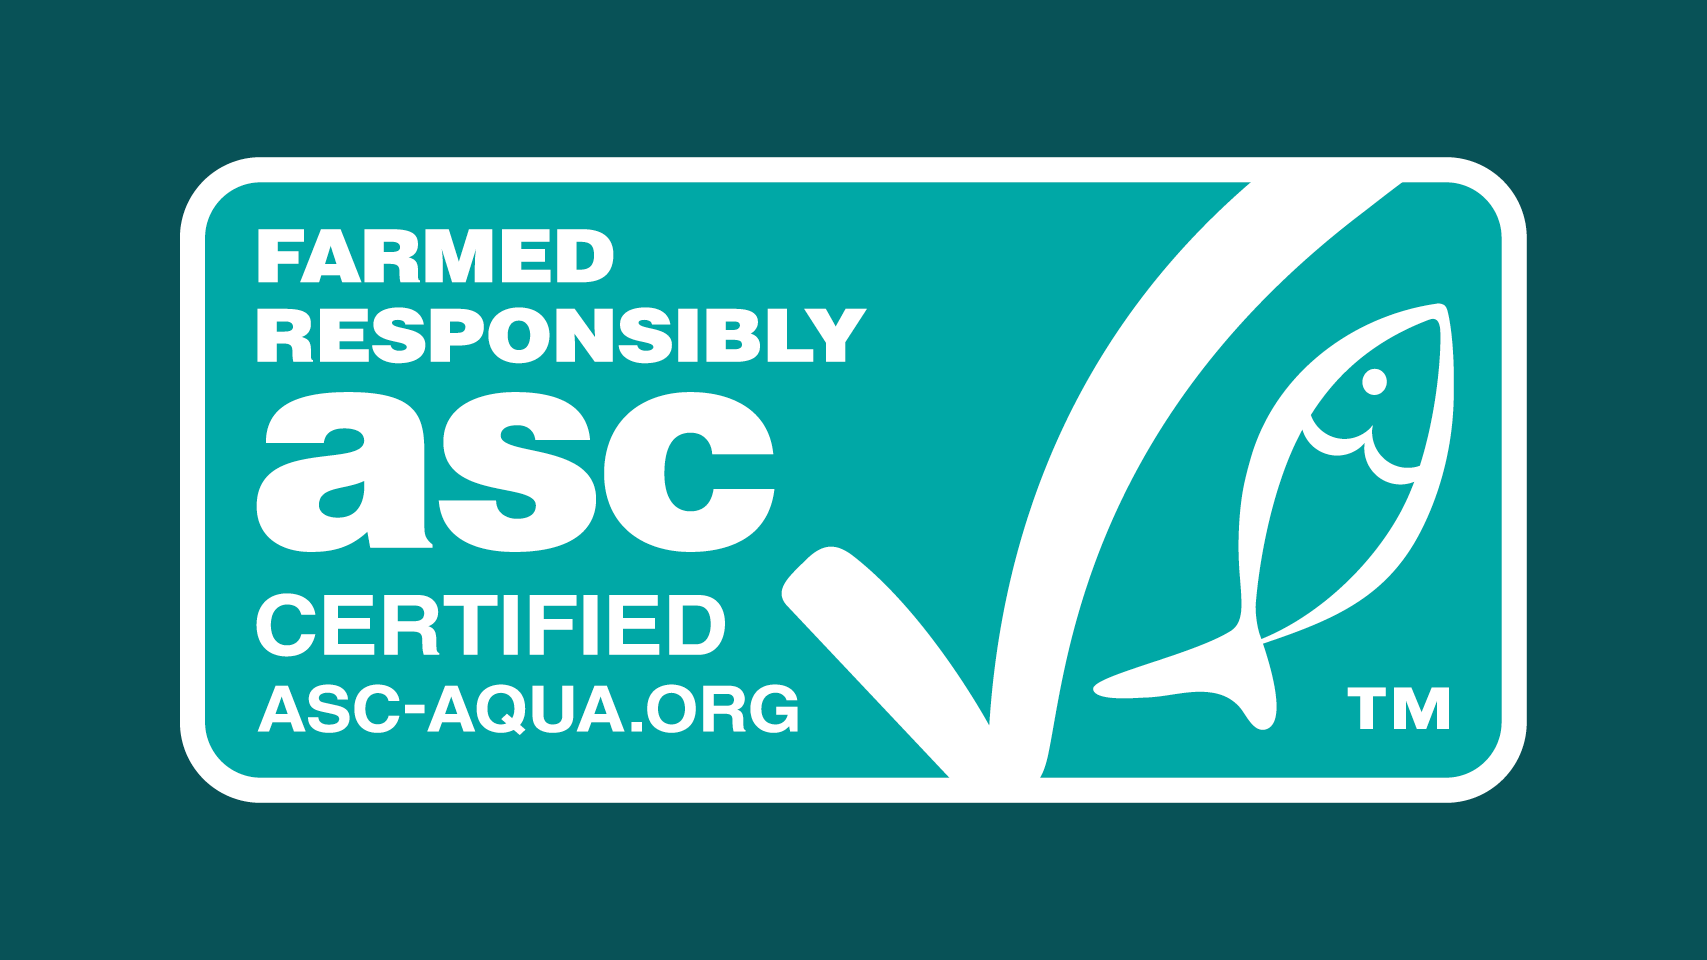 Achieved ASC certification and 4 BAP stars in LATAM for tilapia.